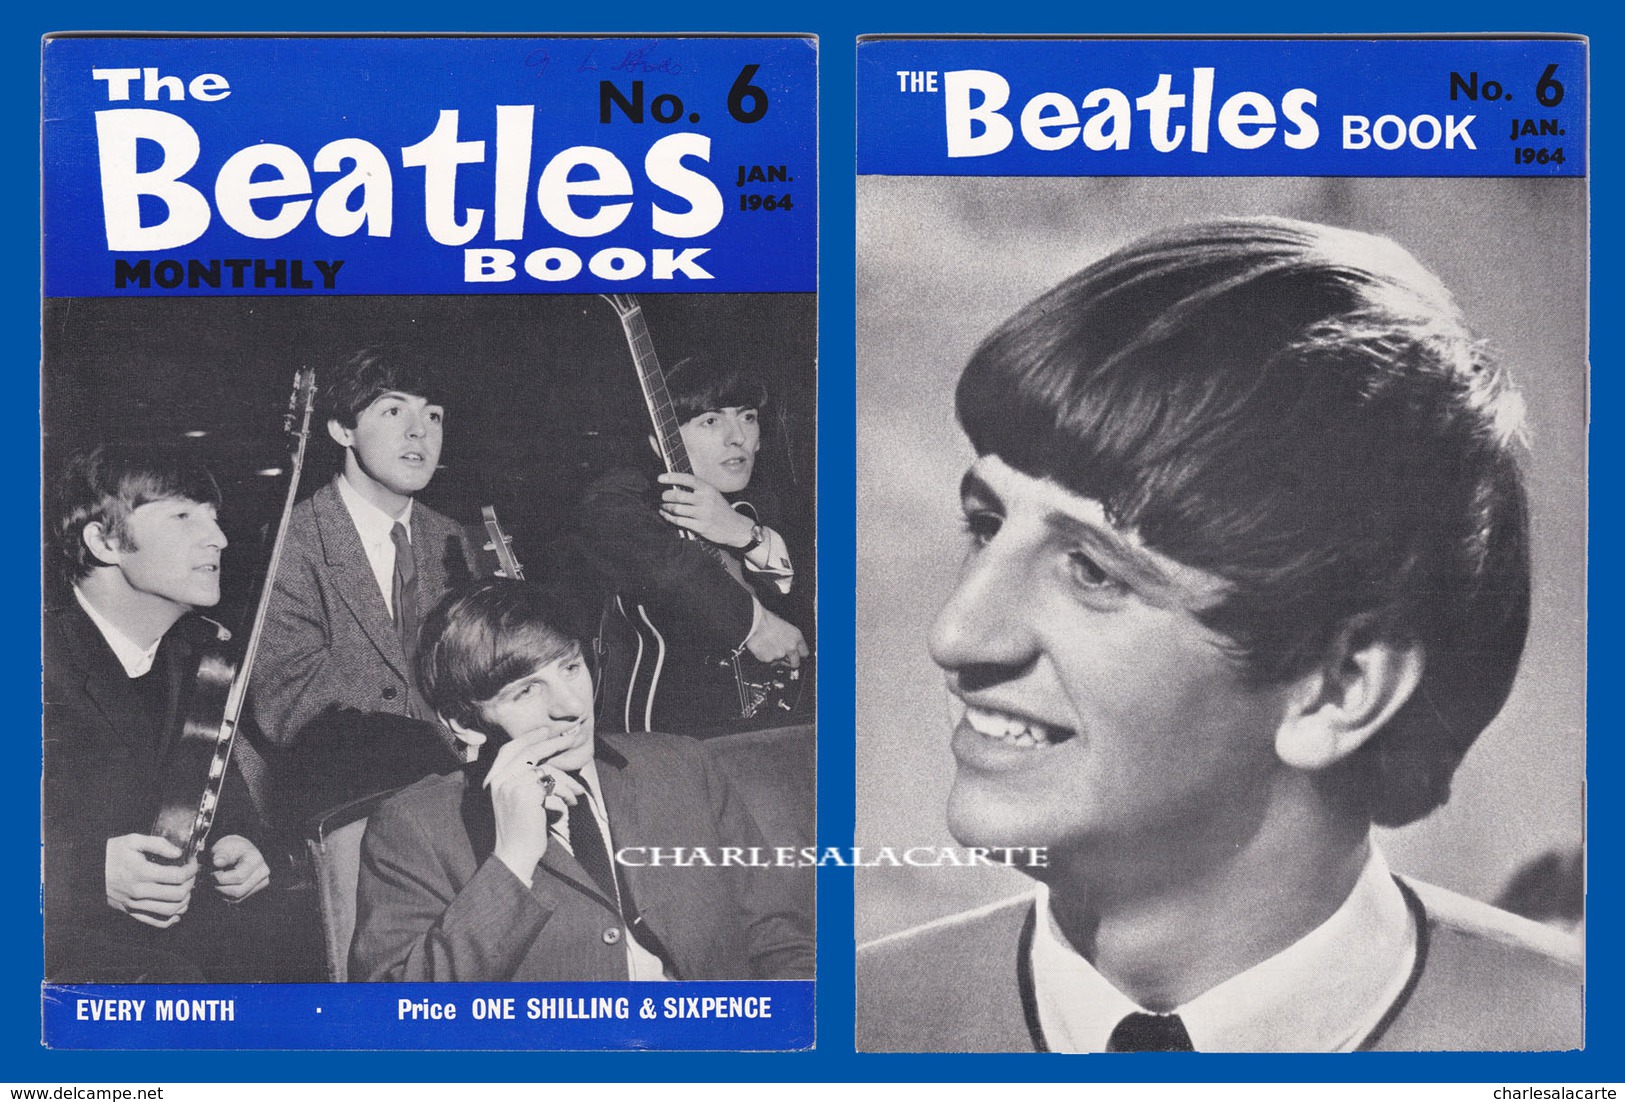 1964 JANUARY THE BEATLES MONTHLY BOOK No.6 AUTHENTIC SUBERB CONDITION SEE THE SCAN - Unterhaltung